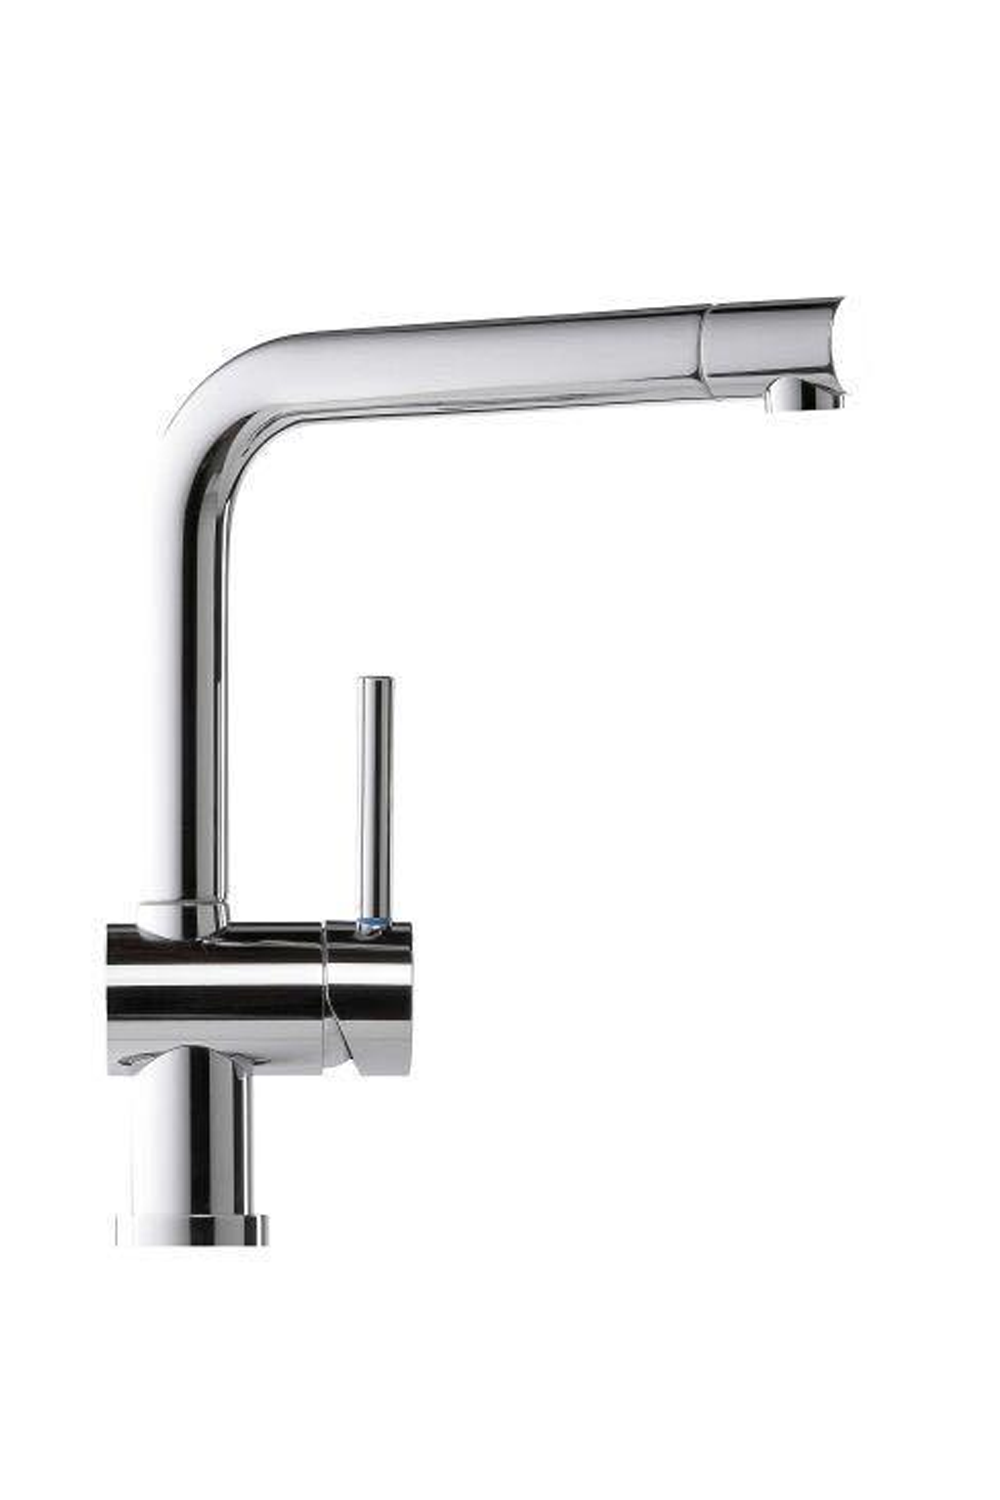 LUISINA RCD114 single level kitchen sink mixer | Made in Italy |